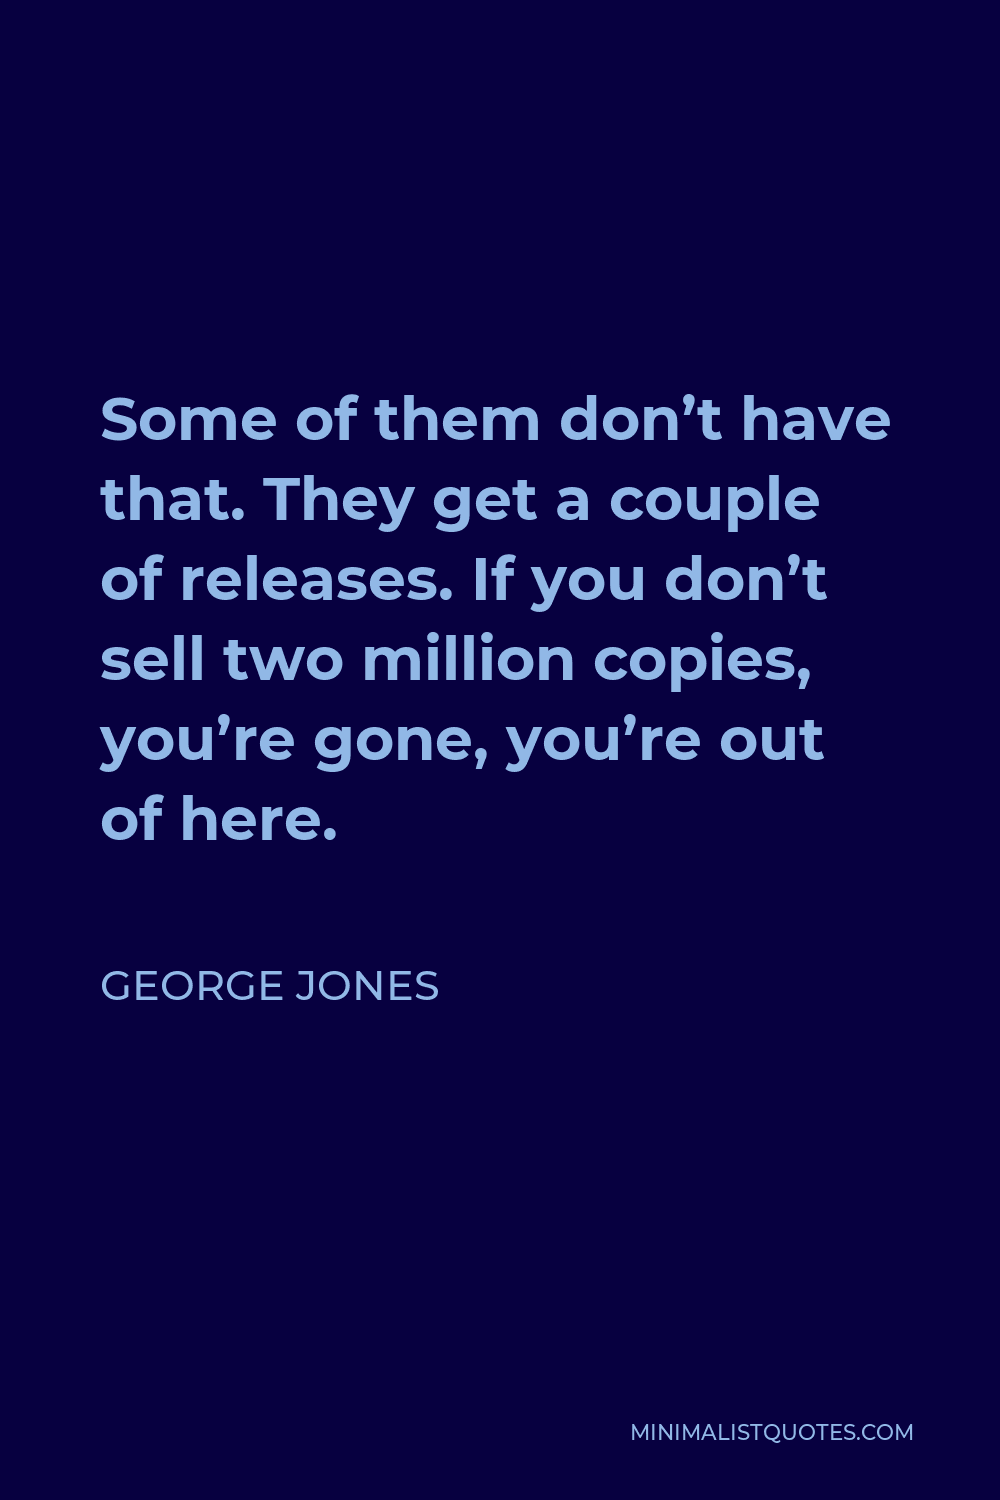 George Jones Quote - Some of them don’t have that. They get a couple of releases. If you don’t sell two million copies, you’re gone, you’re out of here.